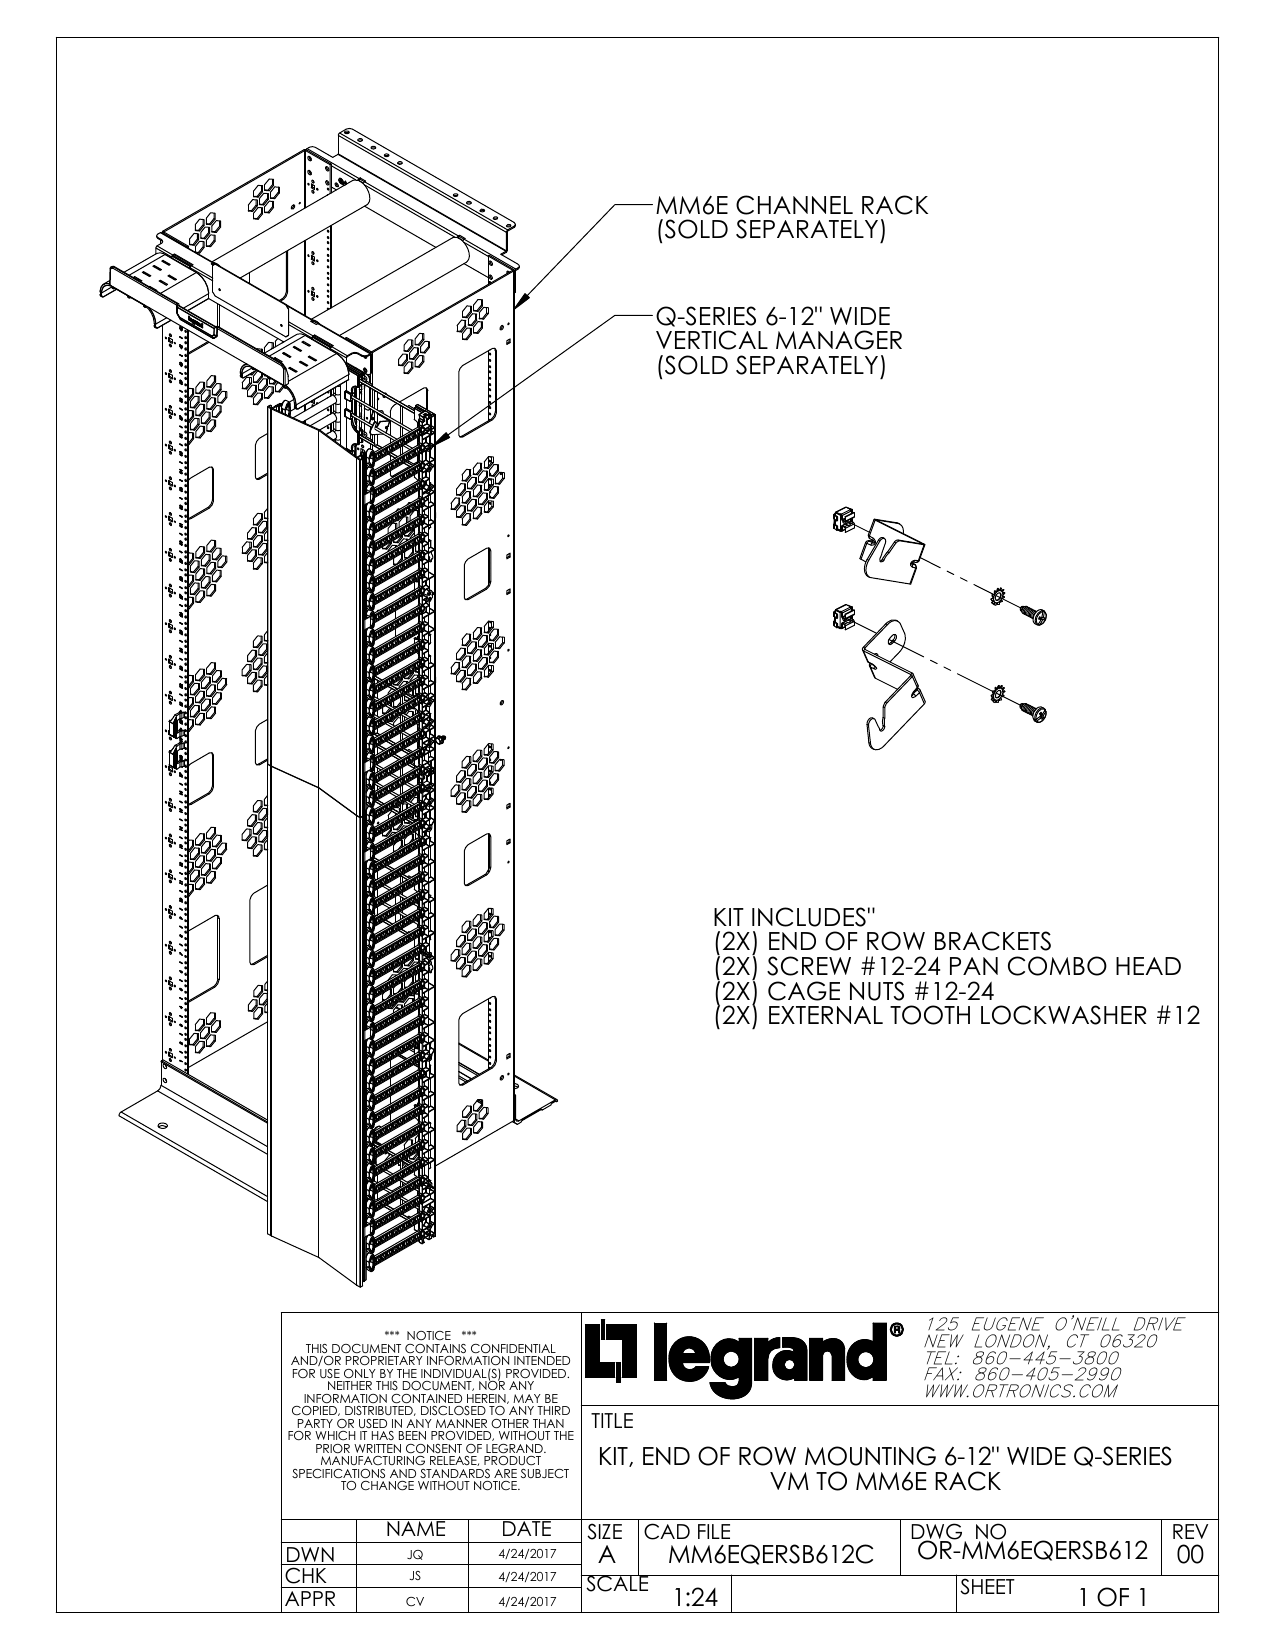 Legrand Mighty Mo 6e 2 Post Channel Racks Mm6eqersb612 Customer Drawing Specification Manualzz